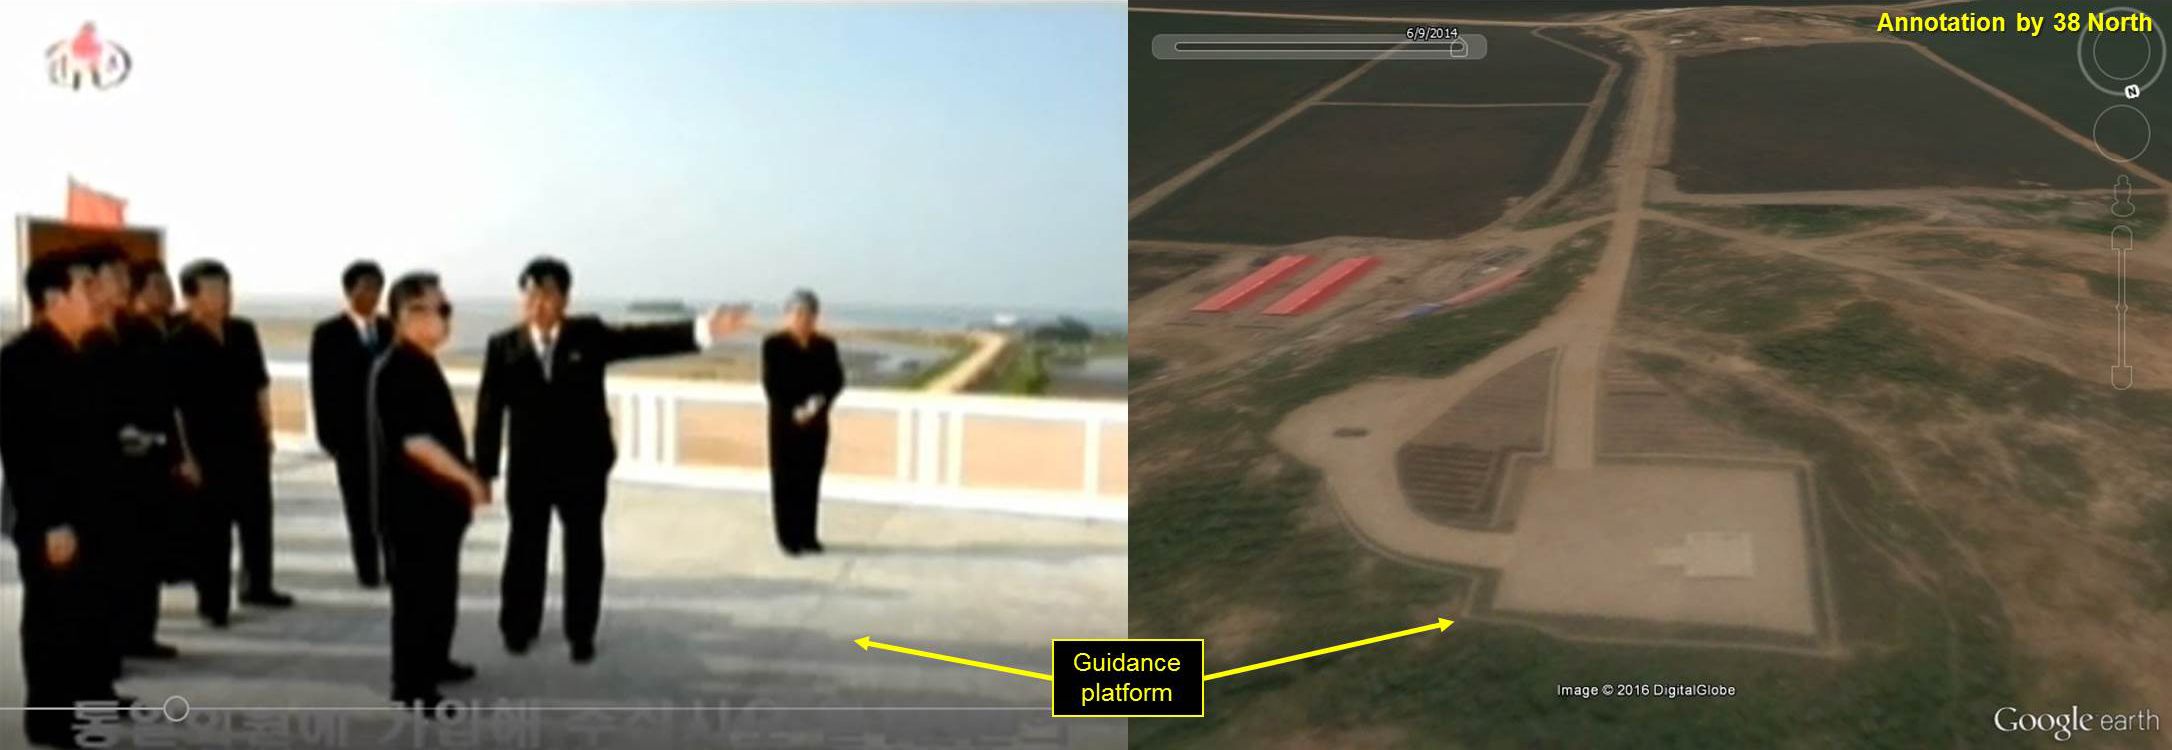 Figure 2. Kim Jong Il providing on-the-spot guidance from the platform at the Taegyedo Tideland project.